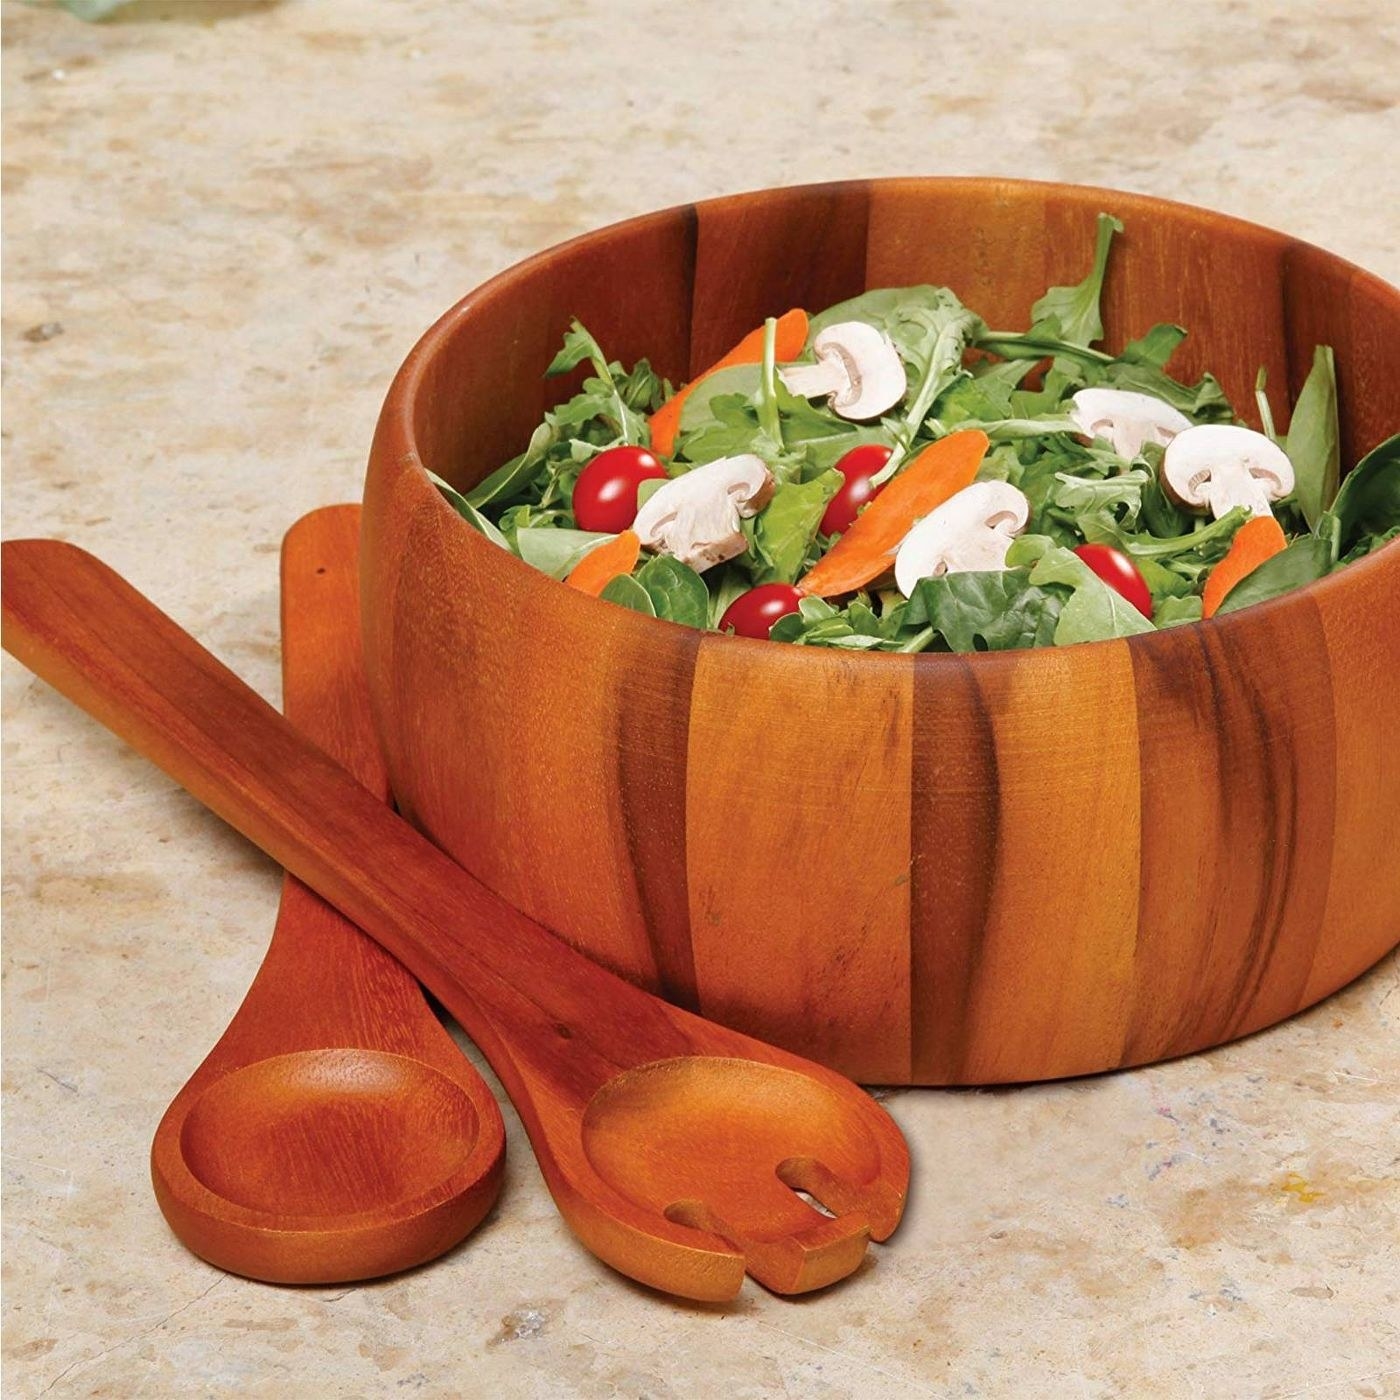 a matching set of two salad forks and a salad bowl